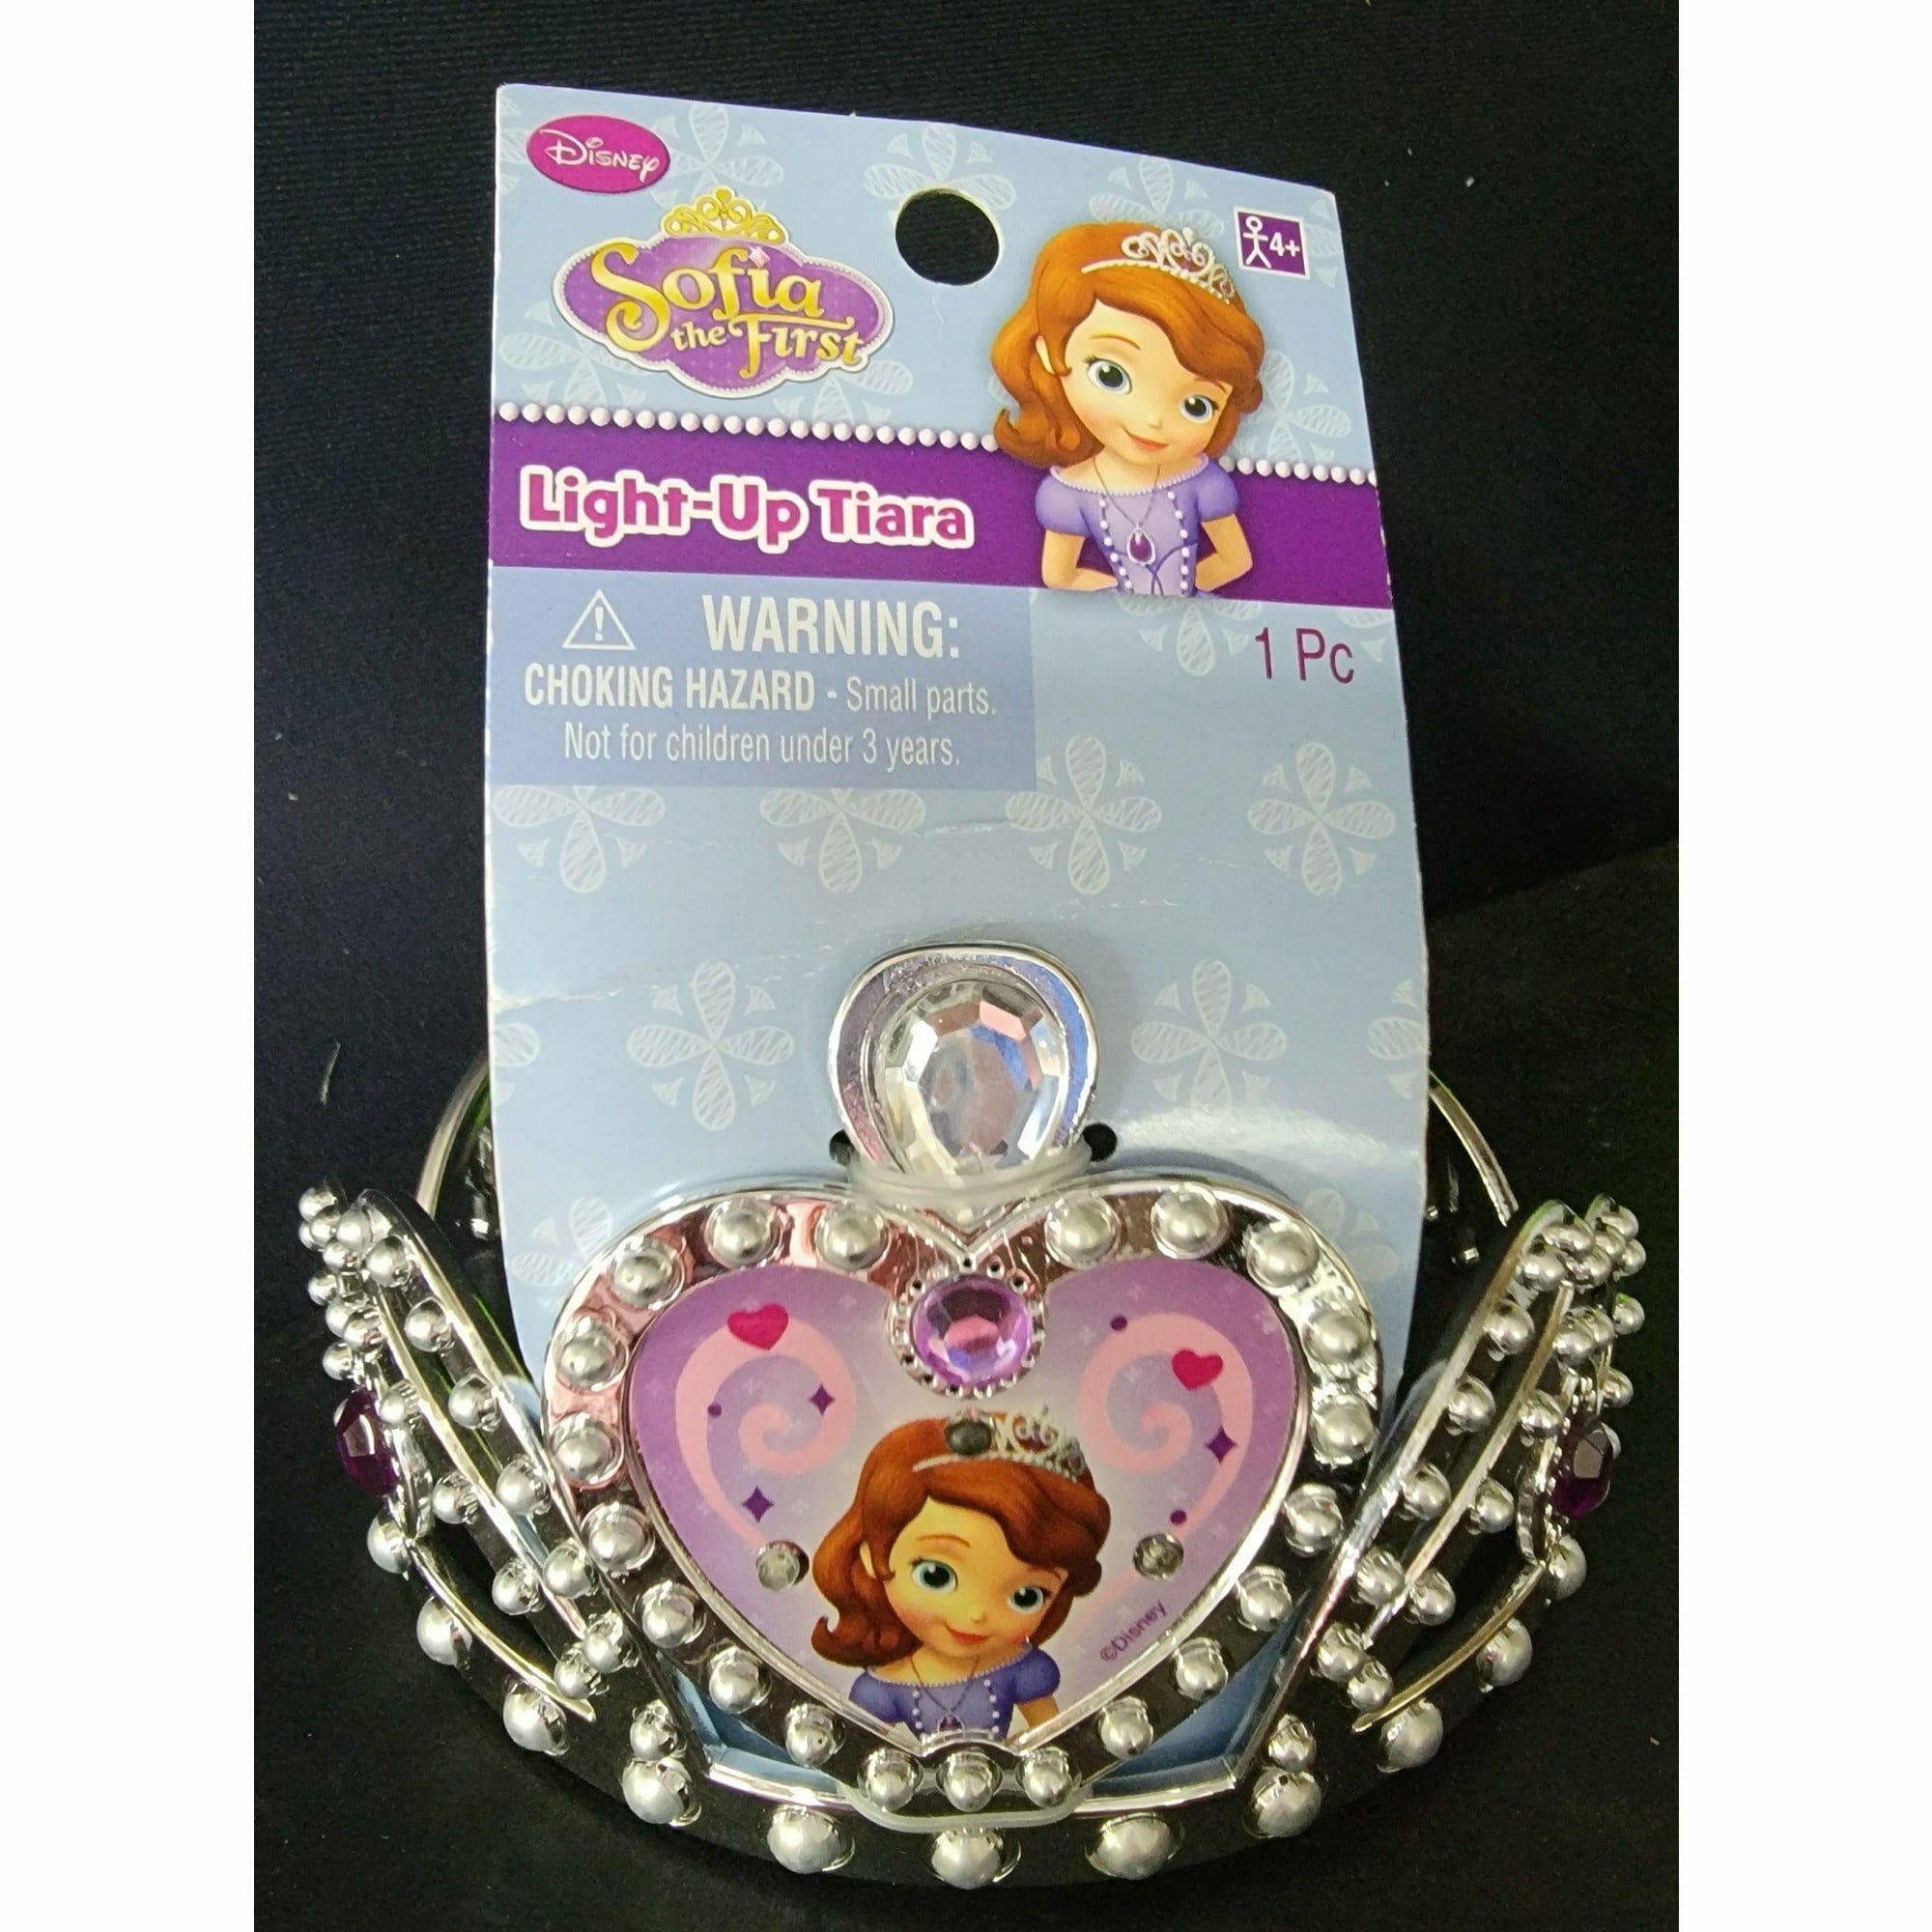 Amscan COSTUMES: ACCESSORIES Disney Sofia the First Light-Up Tiara